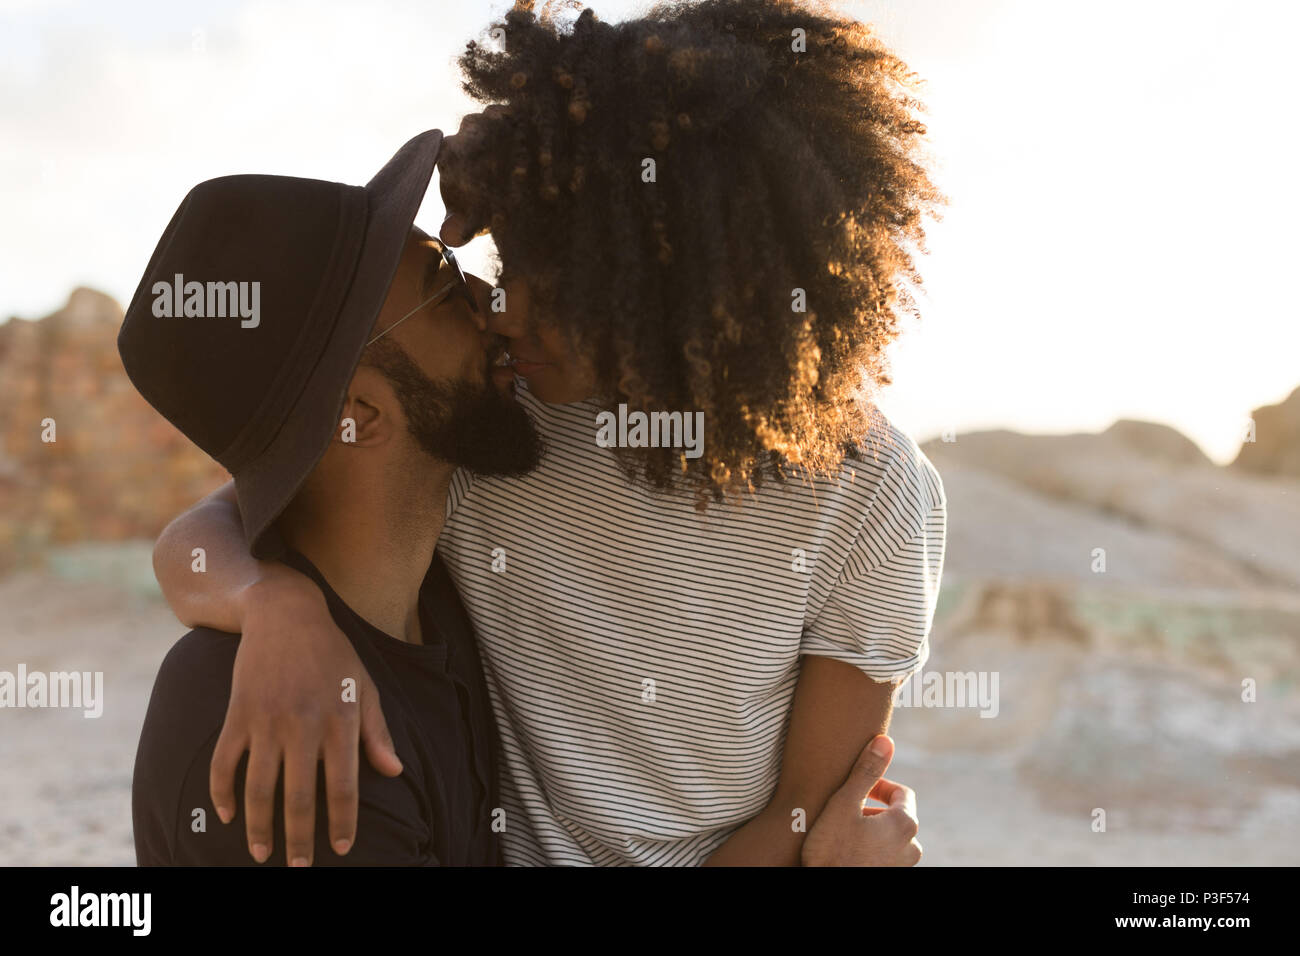 Couple kissing each other at beach Stock Photo